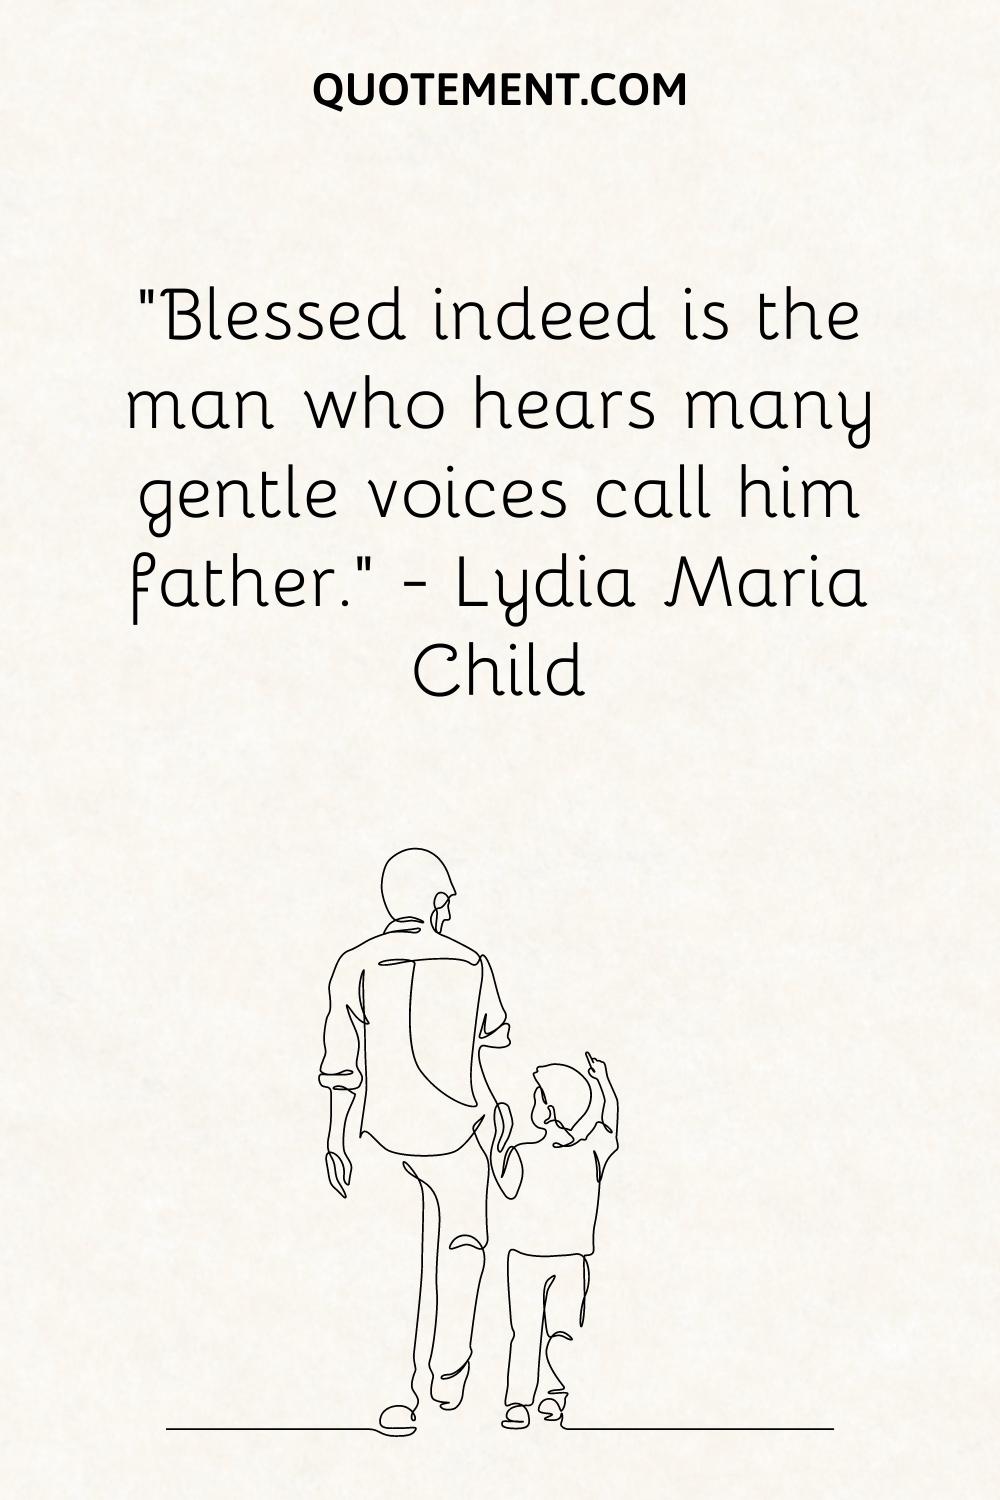 “Blessed indeed is the man who hears many gentle voices call him father.” — Lydia Maria Child